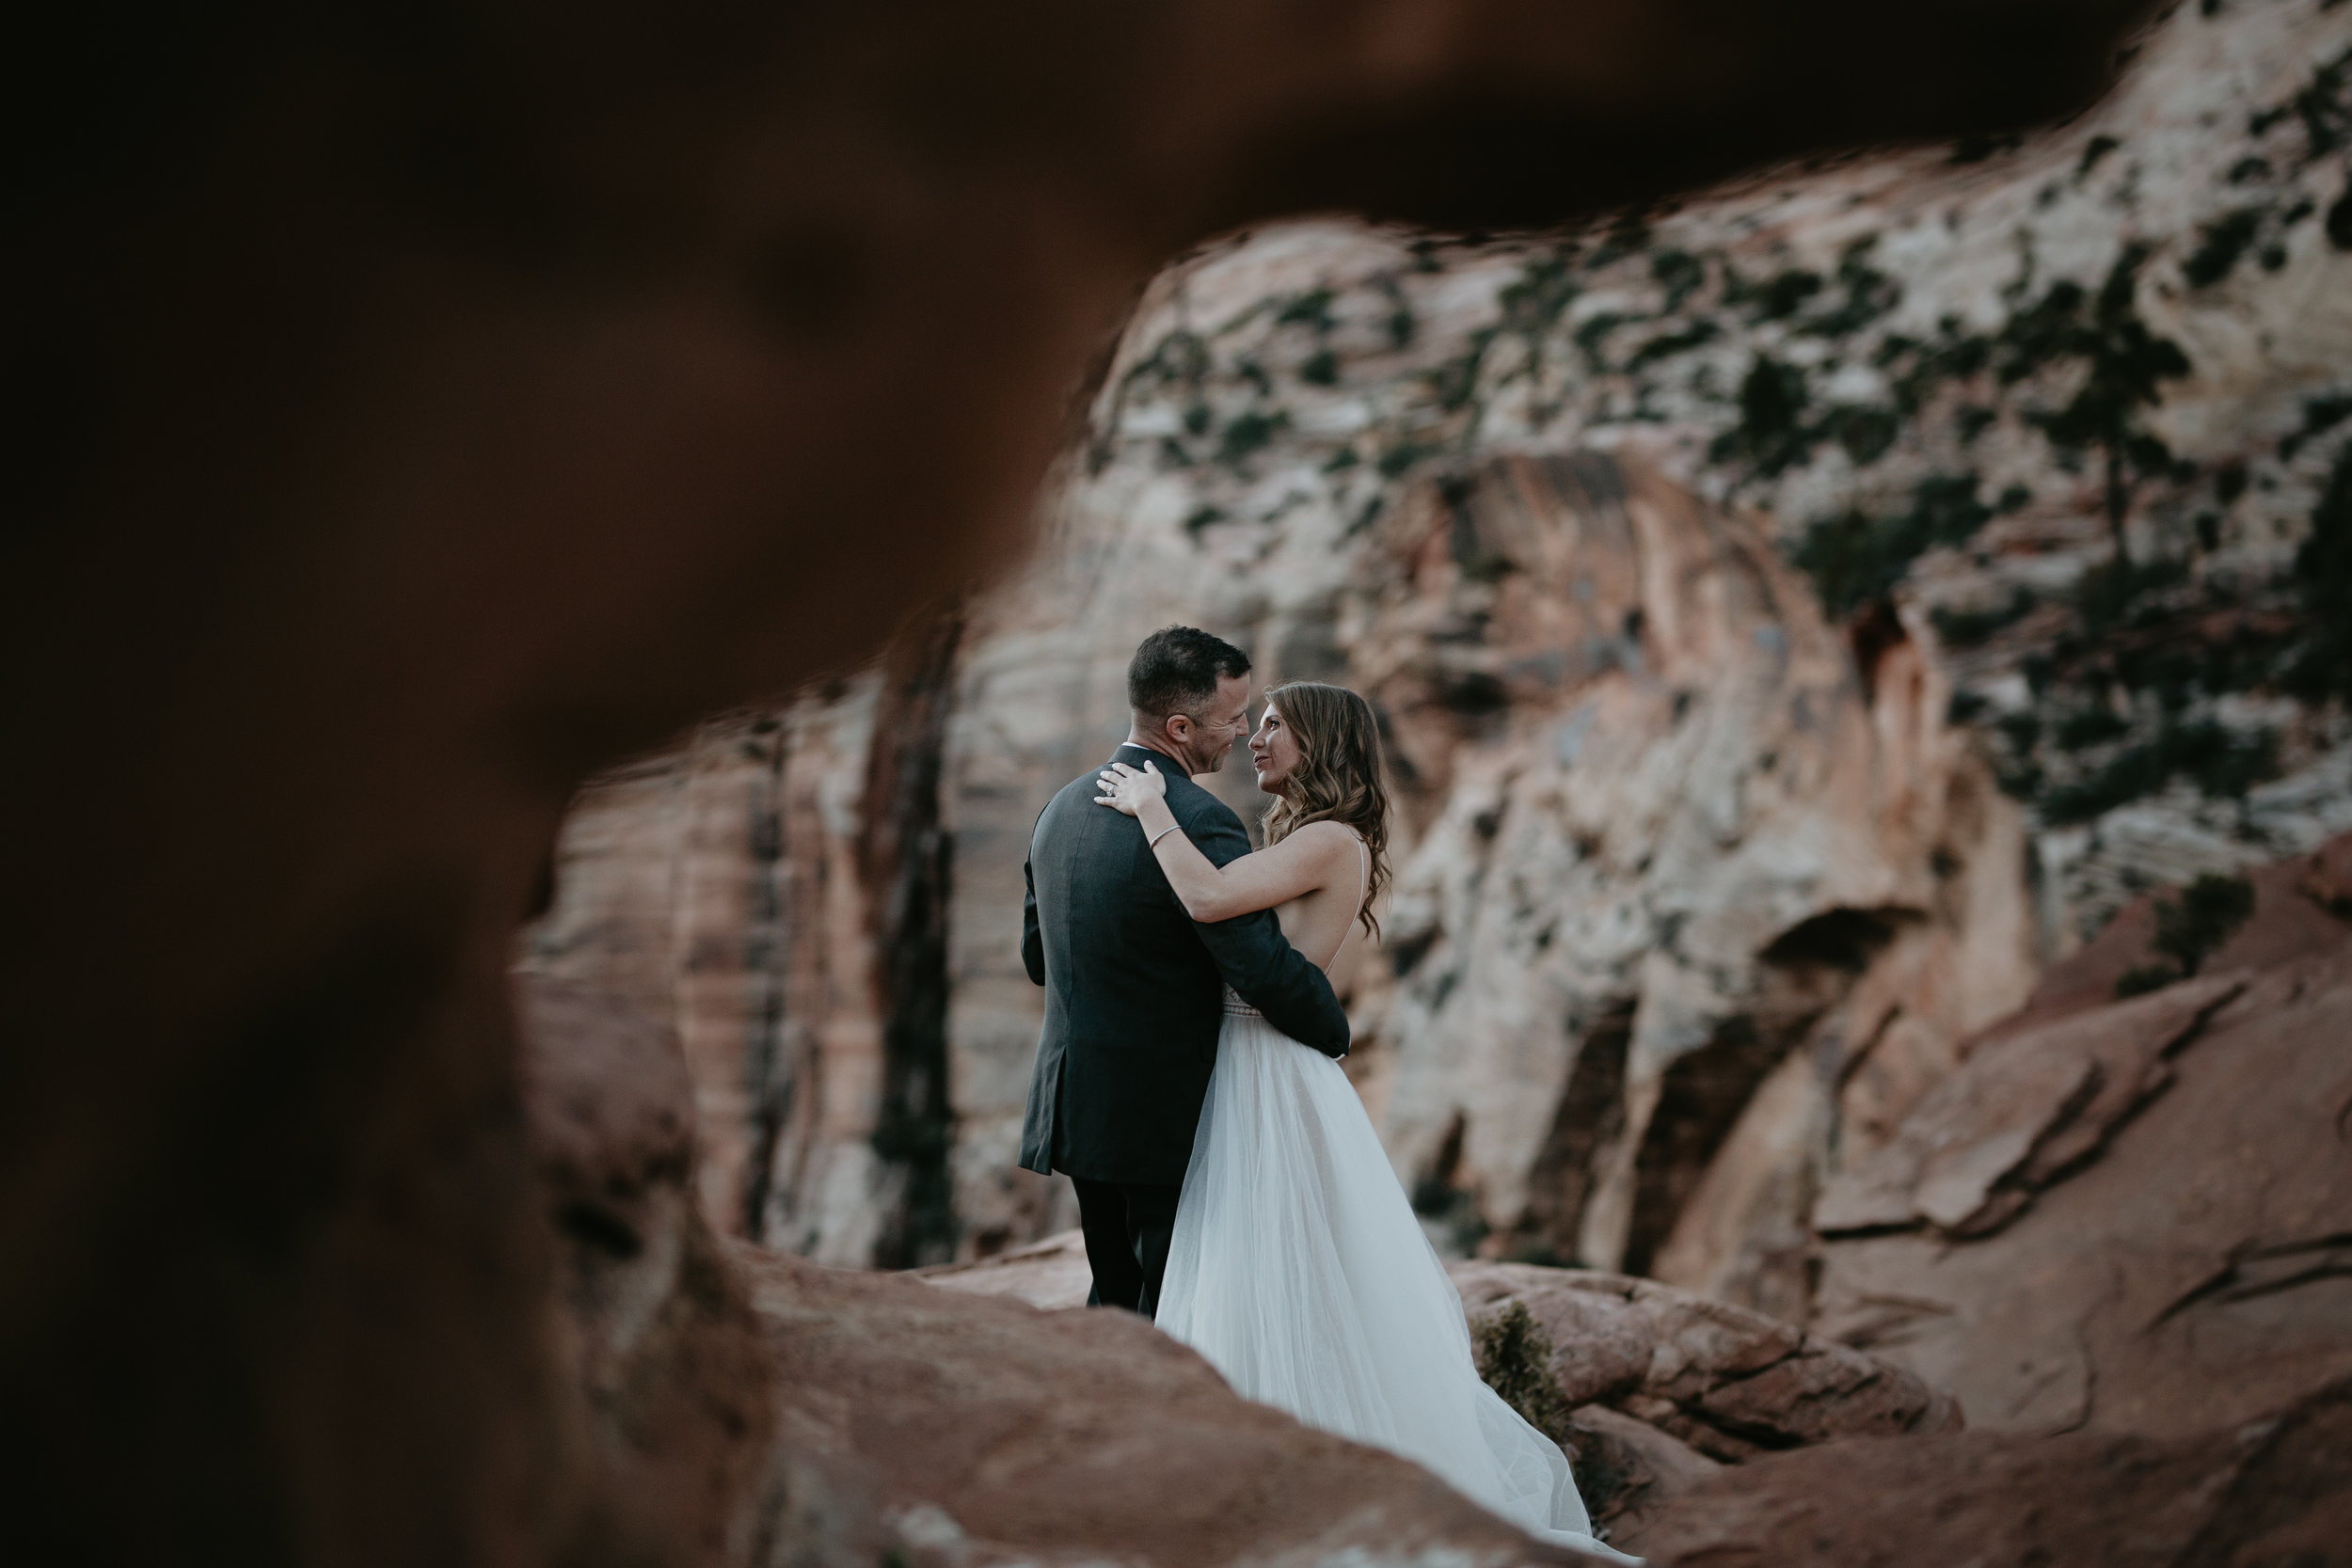 nicole-daacke-photography-zion-national-park-elopement-photographer-canyon-overlook-trail-elope-hiking-adventure-wedding-photos-fall-utah-red-rock-canyon-stgeorge-eloping-photographer-85.jpg